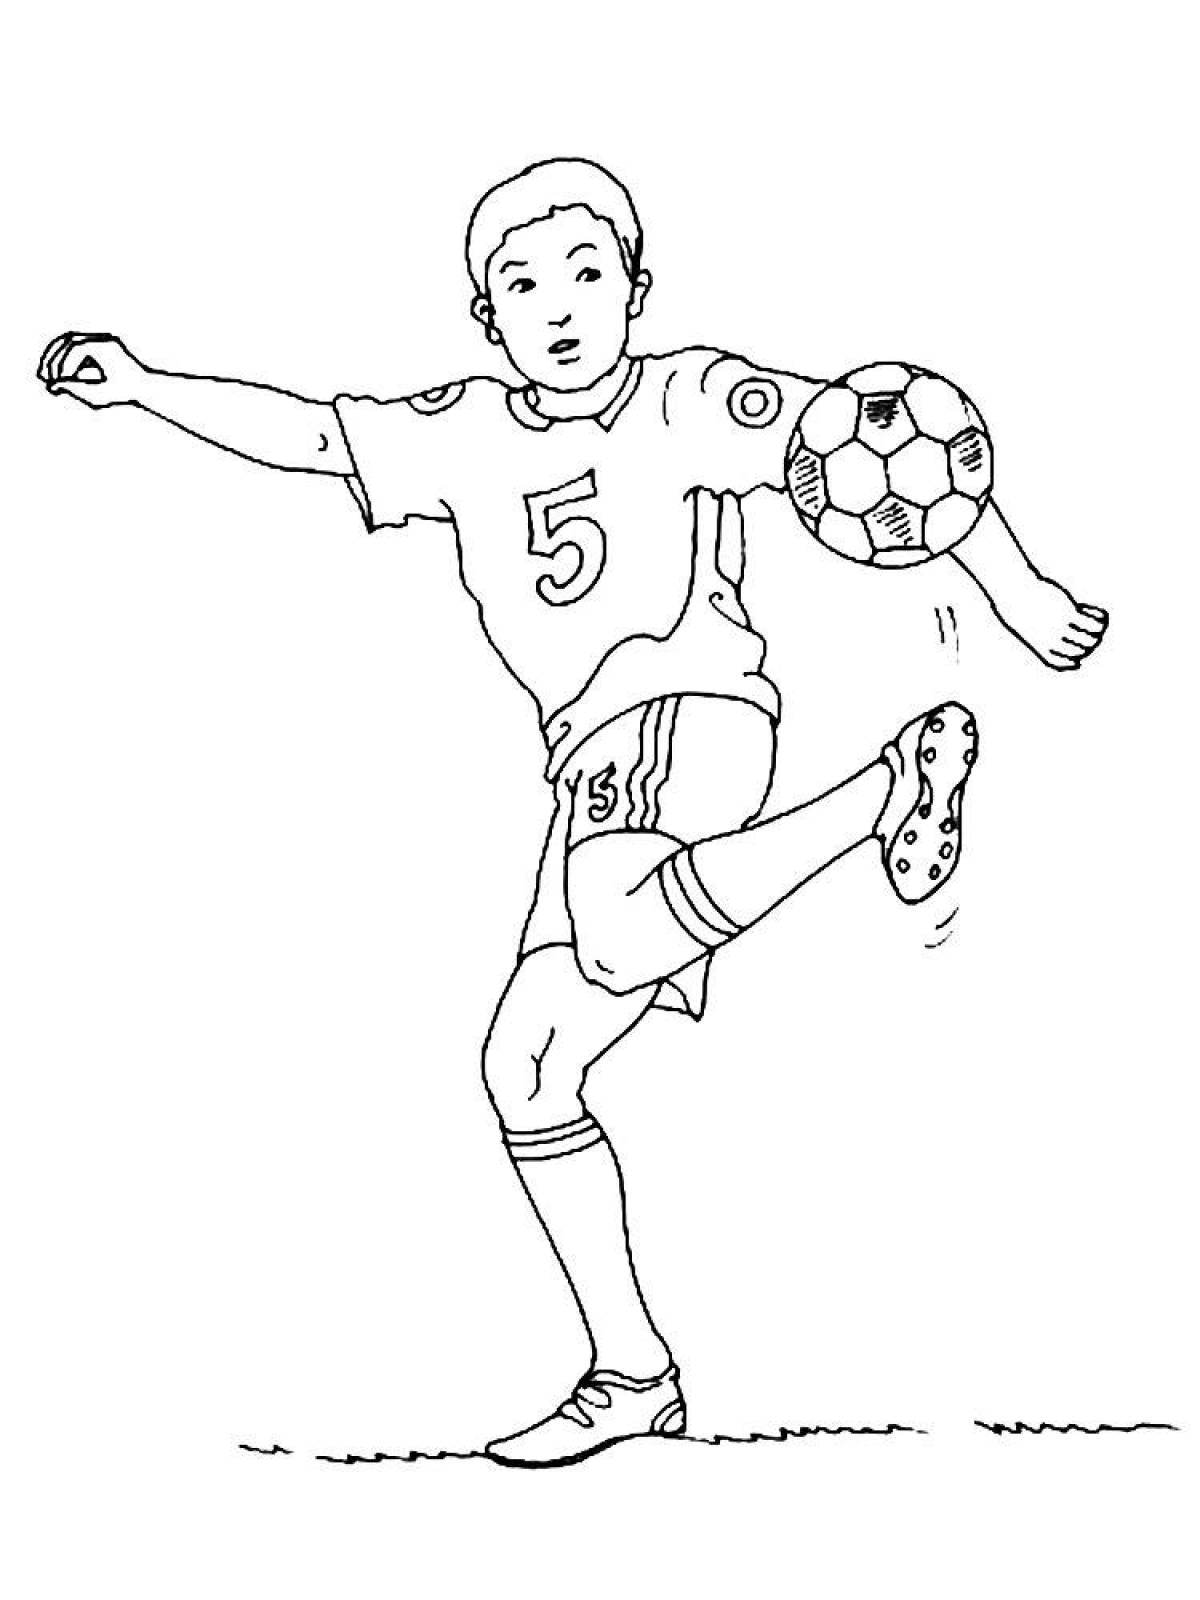 Coloring page agile football player